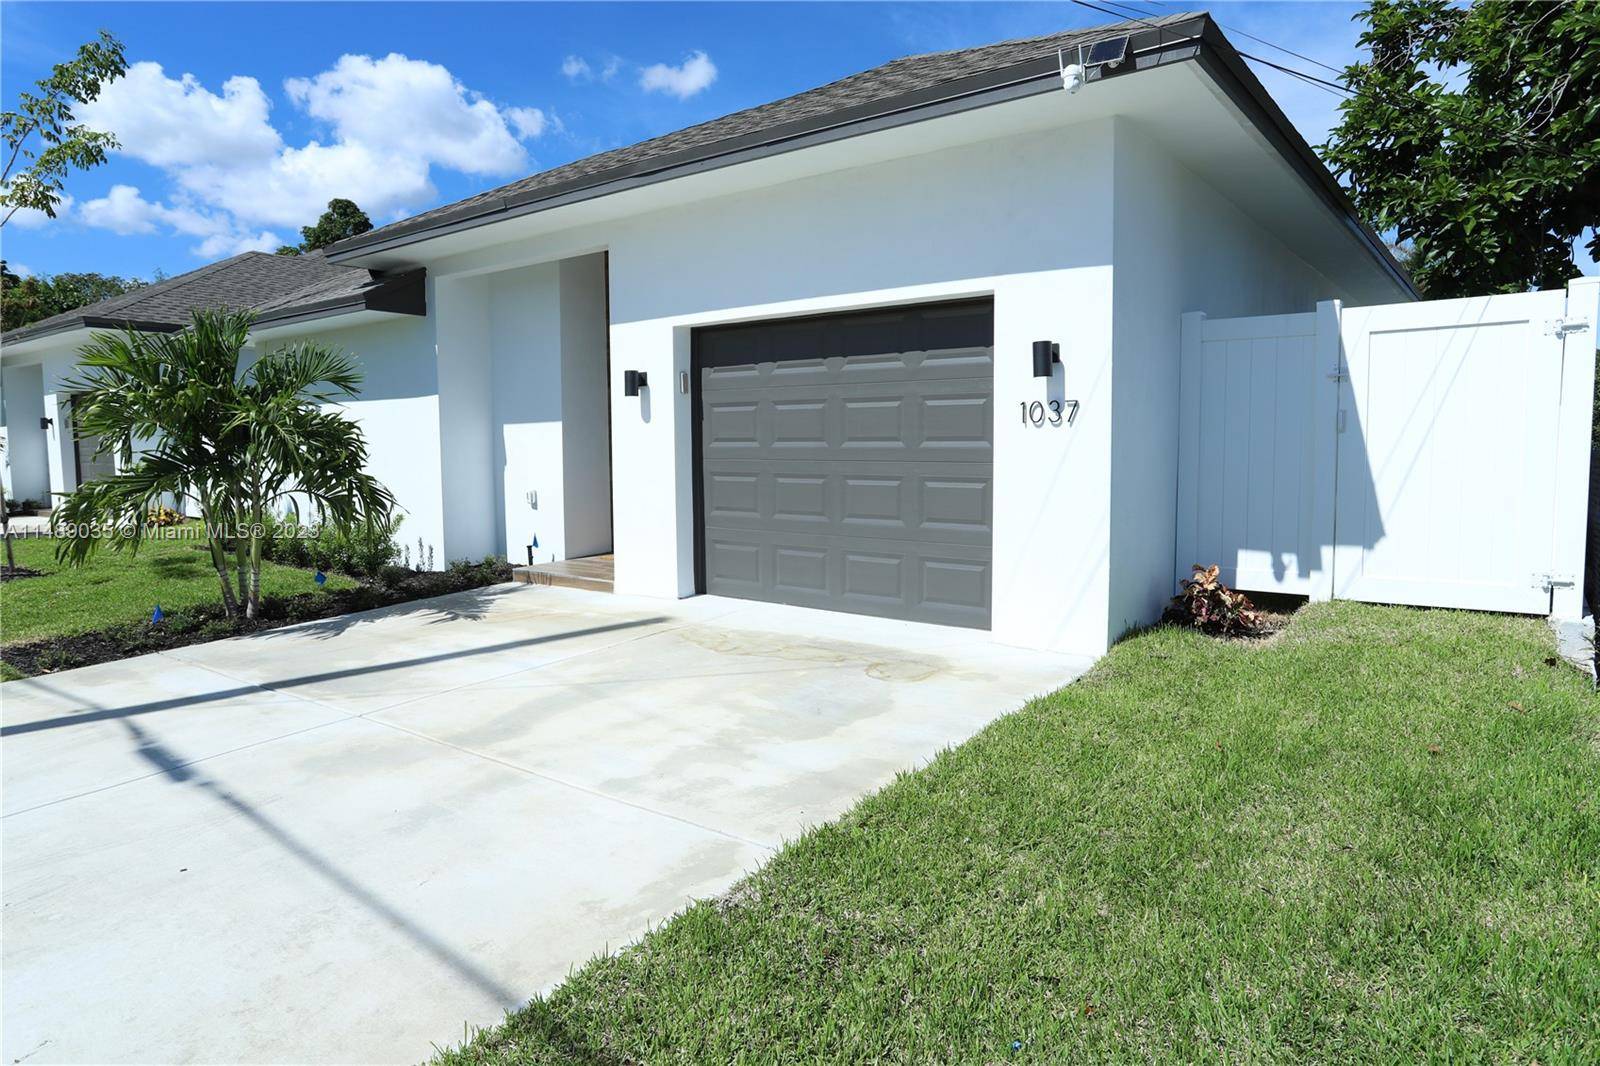 Welcome home to this breathtaking, recently constructed 2023 3 bedroom, 2 1 2 bathroom single family residence nestled in a prime West Palm Beach locale.